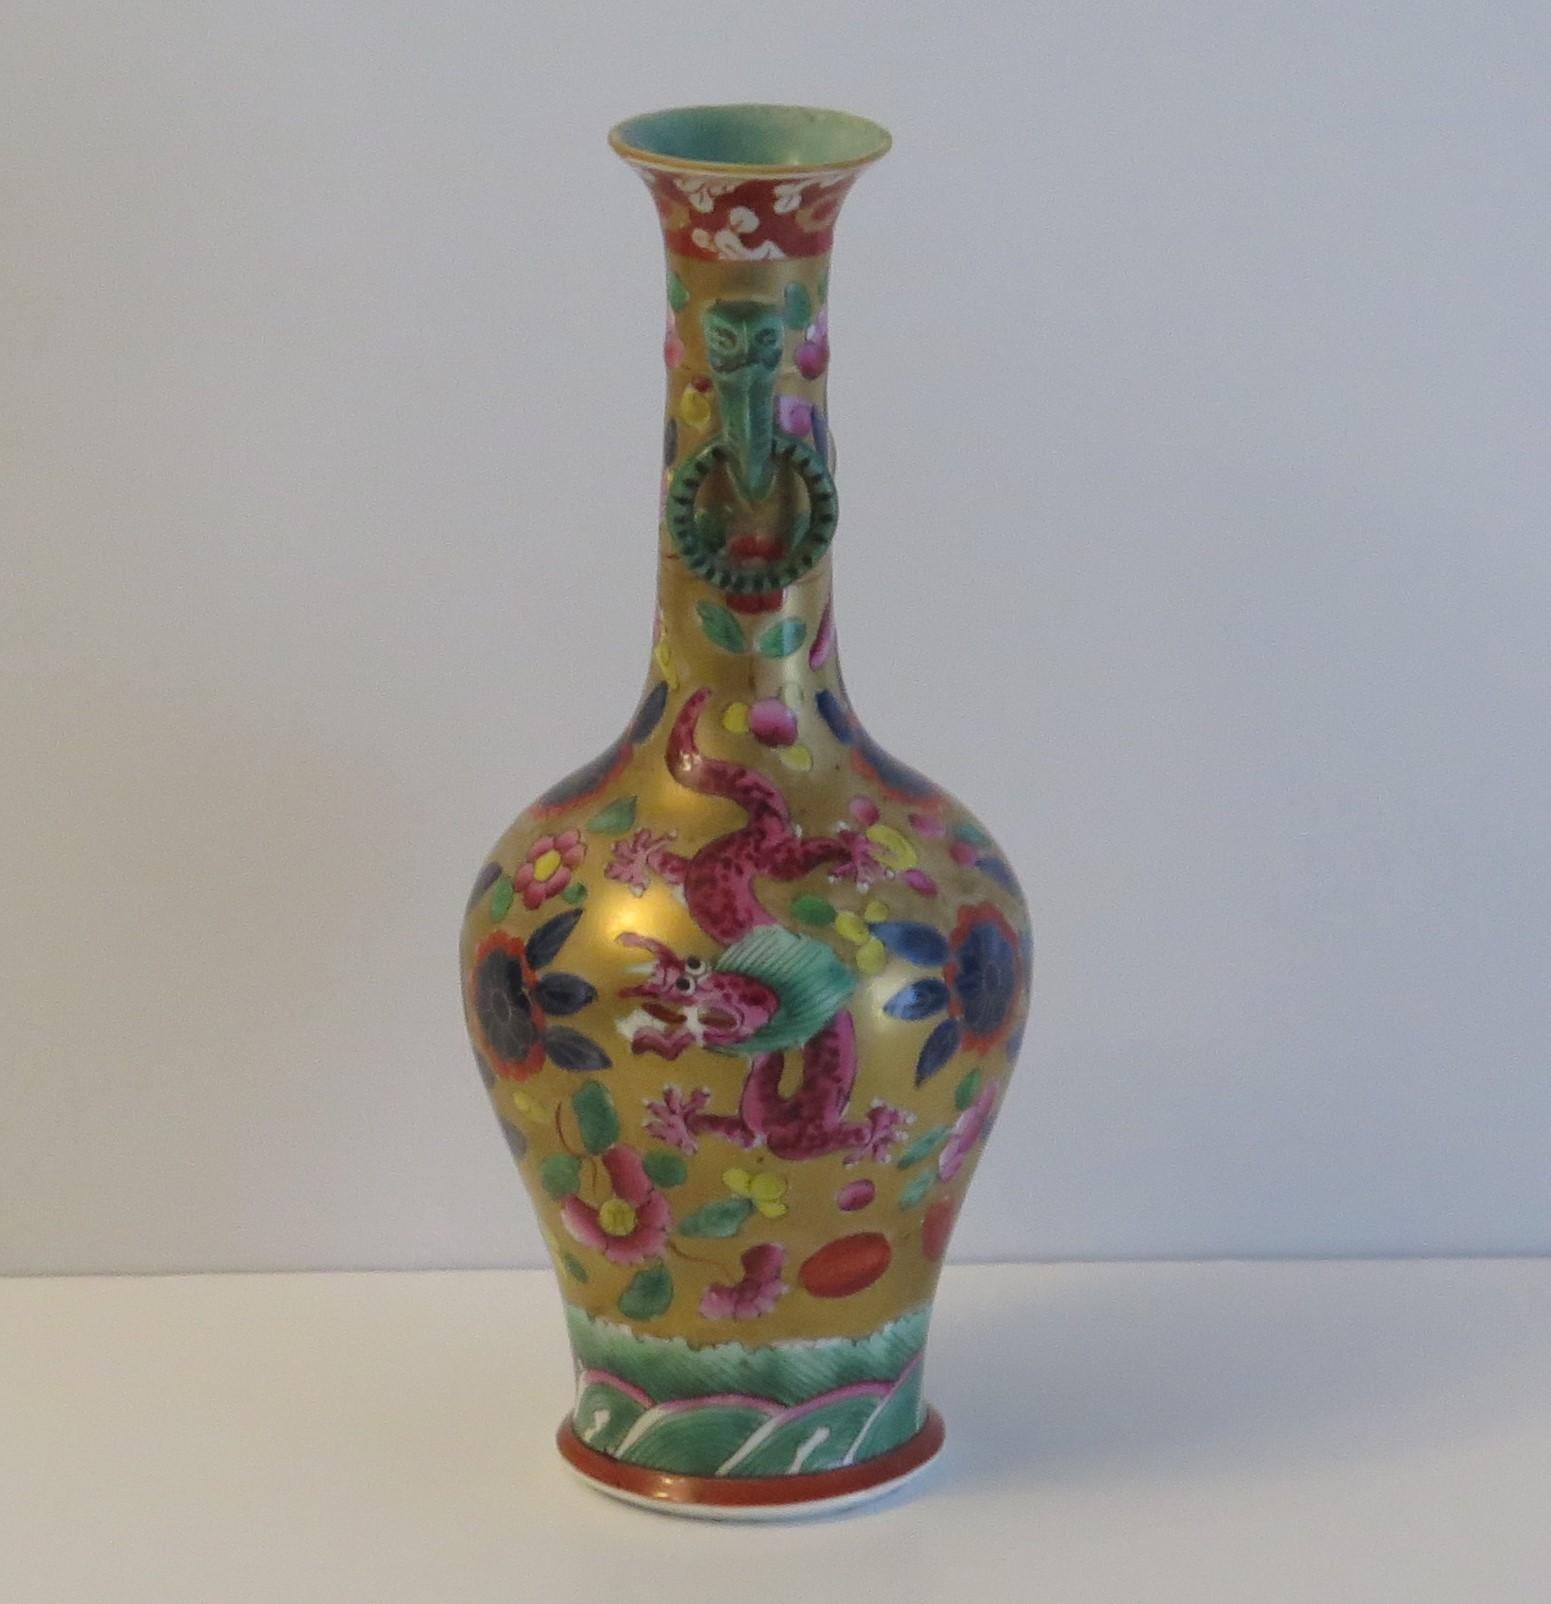 Very Rare Mason's Ironstone Bottle Vase in Chinese Dragon Pattern, circa 1820 In Good Condition For Sale In Lincoln, Lincolnshire